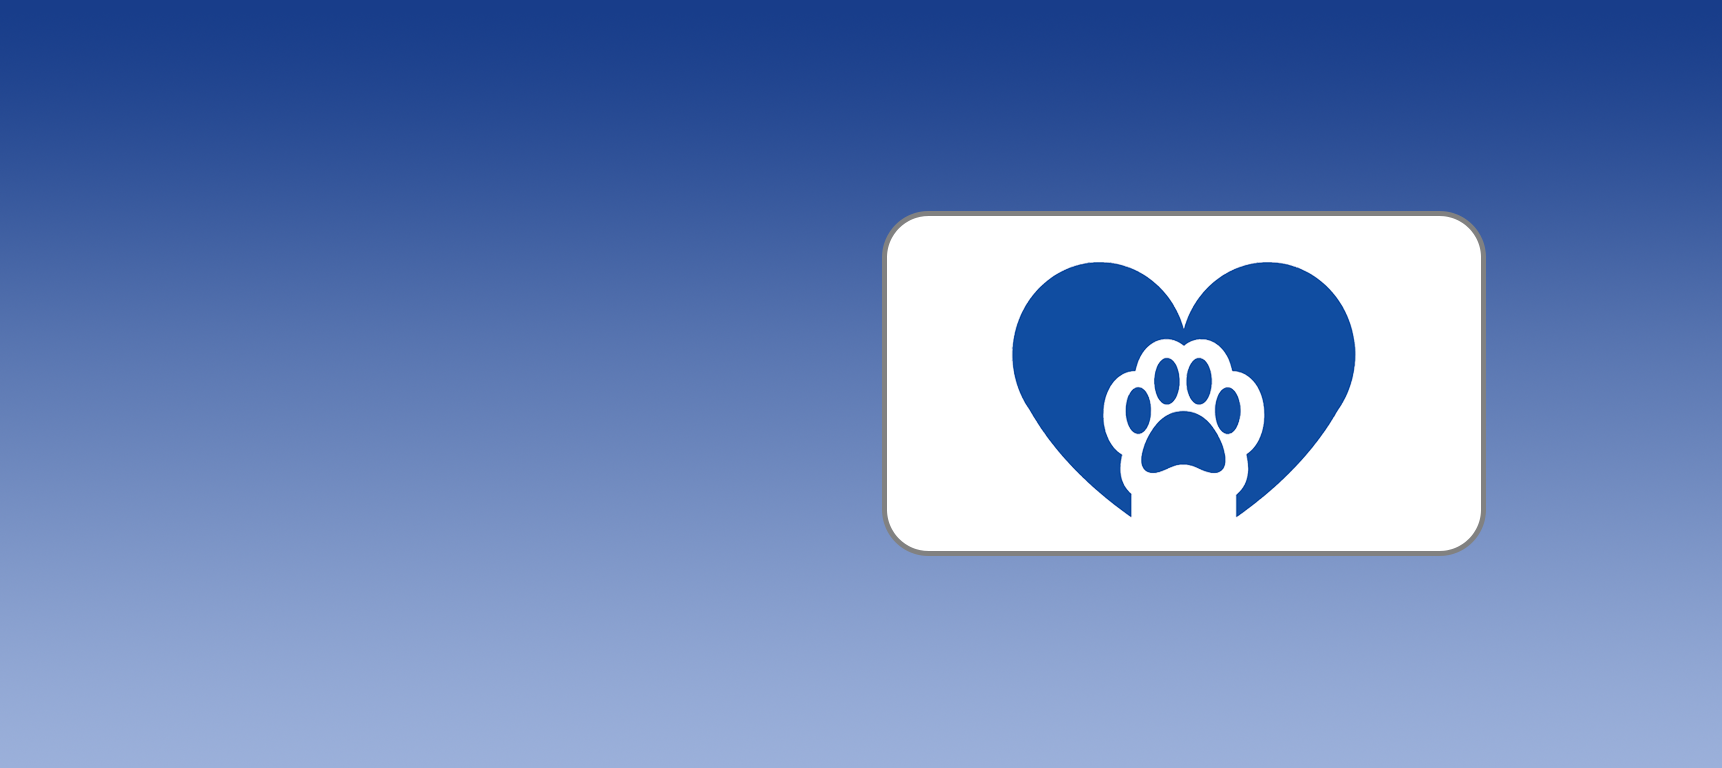 Make a donation to the MetroWest Humane Society Cat Shelter